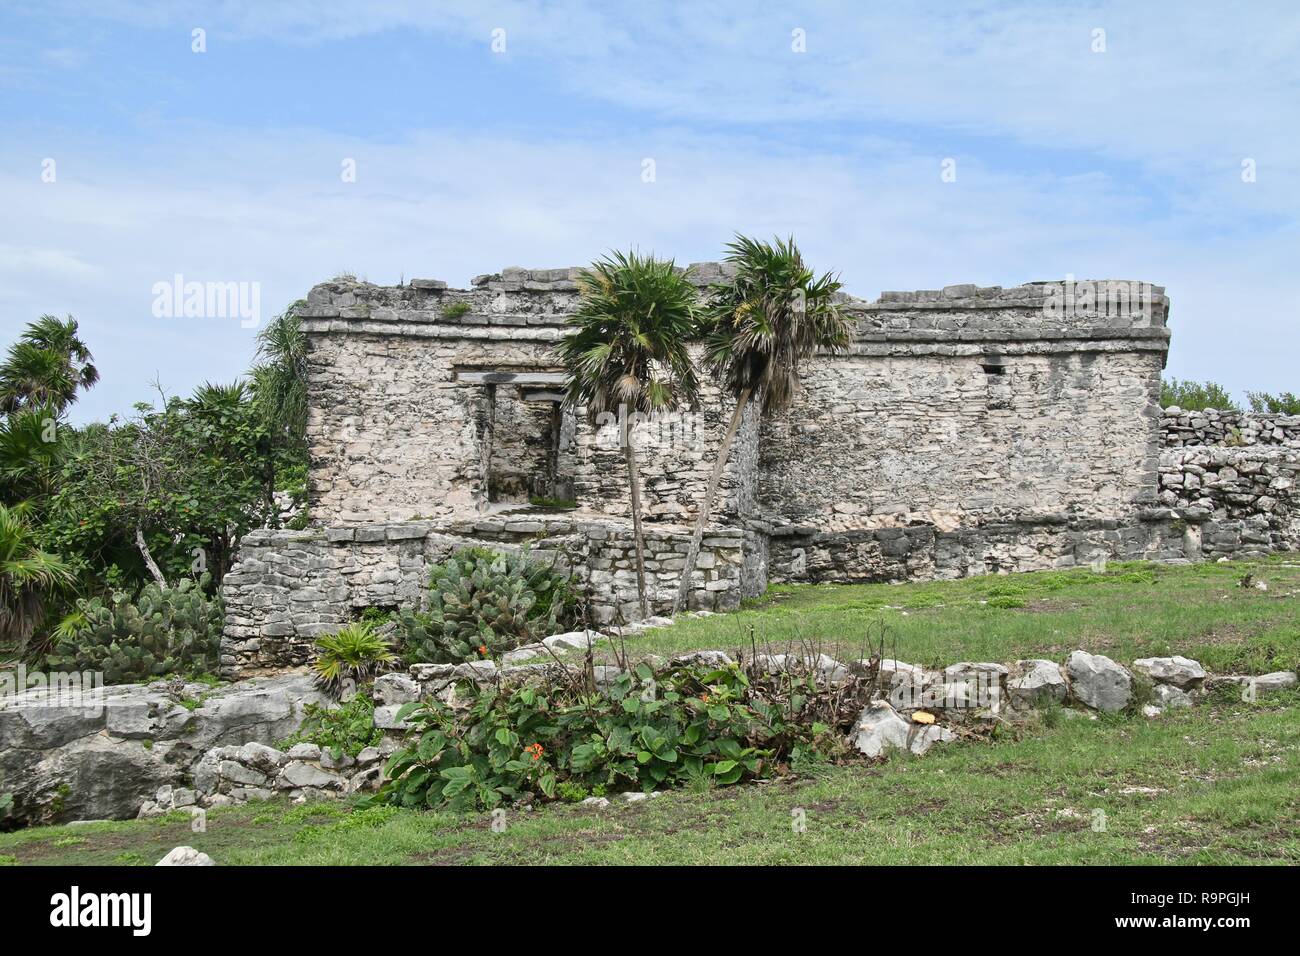 White stone Mayan ruins in Mexico Stock Photo